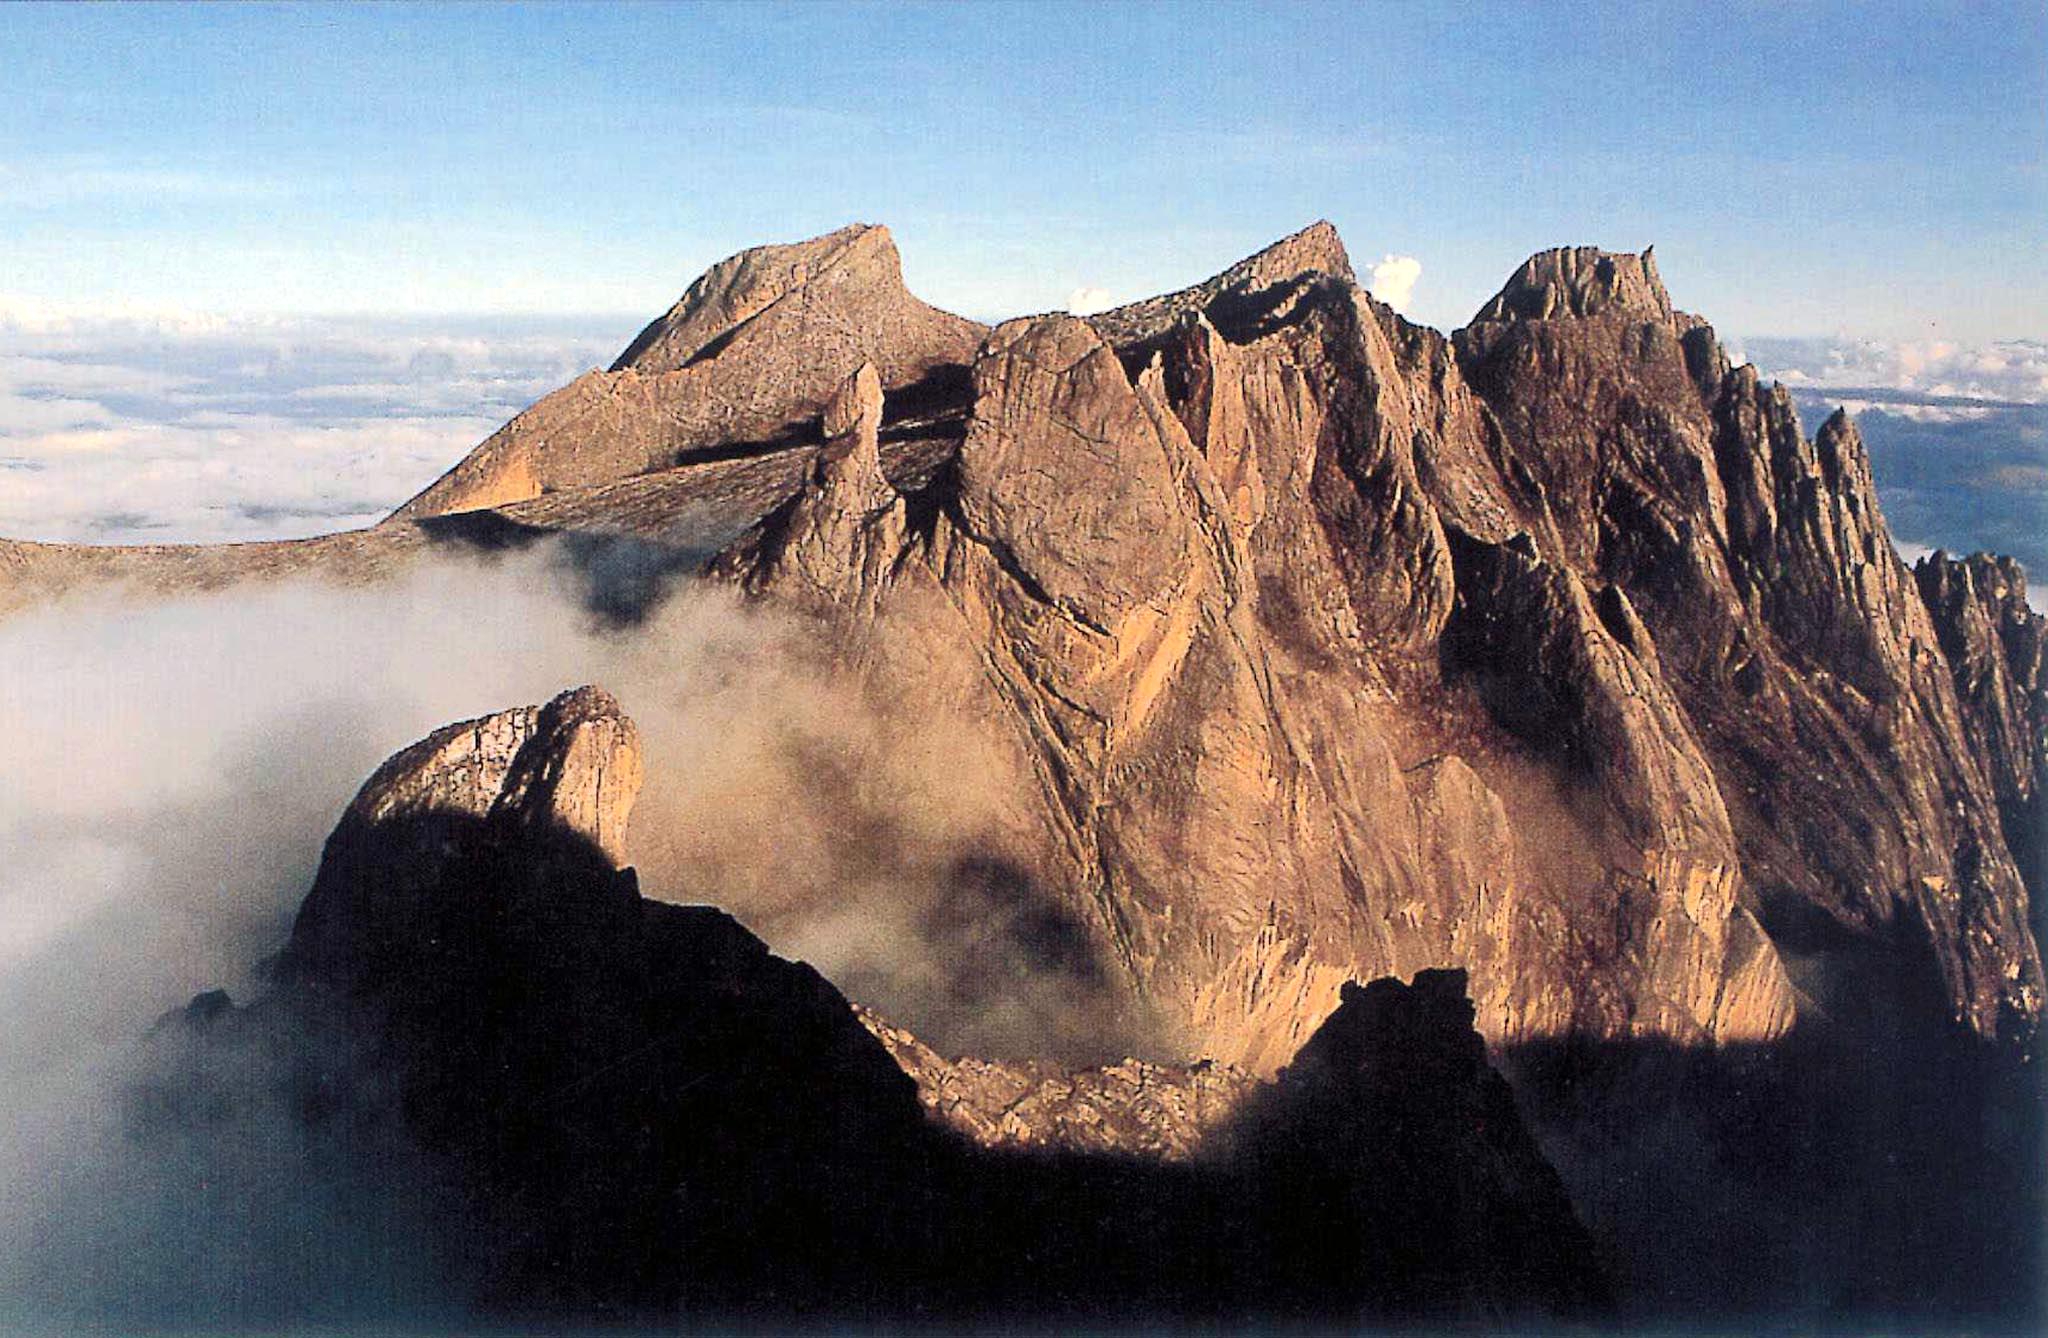 This undated photo shows Mount Kinabalu, South East Asia's highest peak, in East Malaysia's state of Sabah. (AFP/Getty Images)